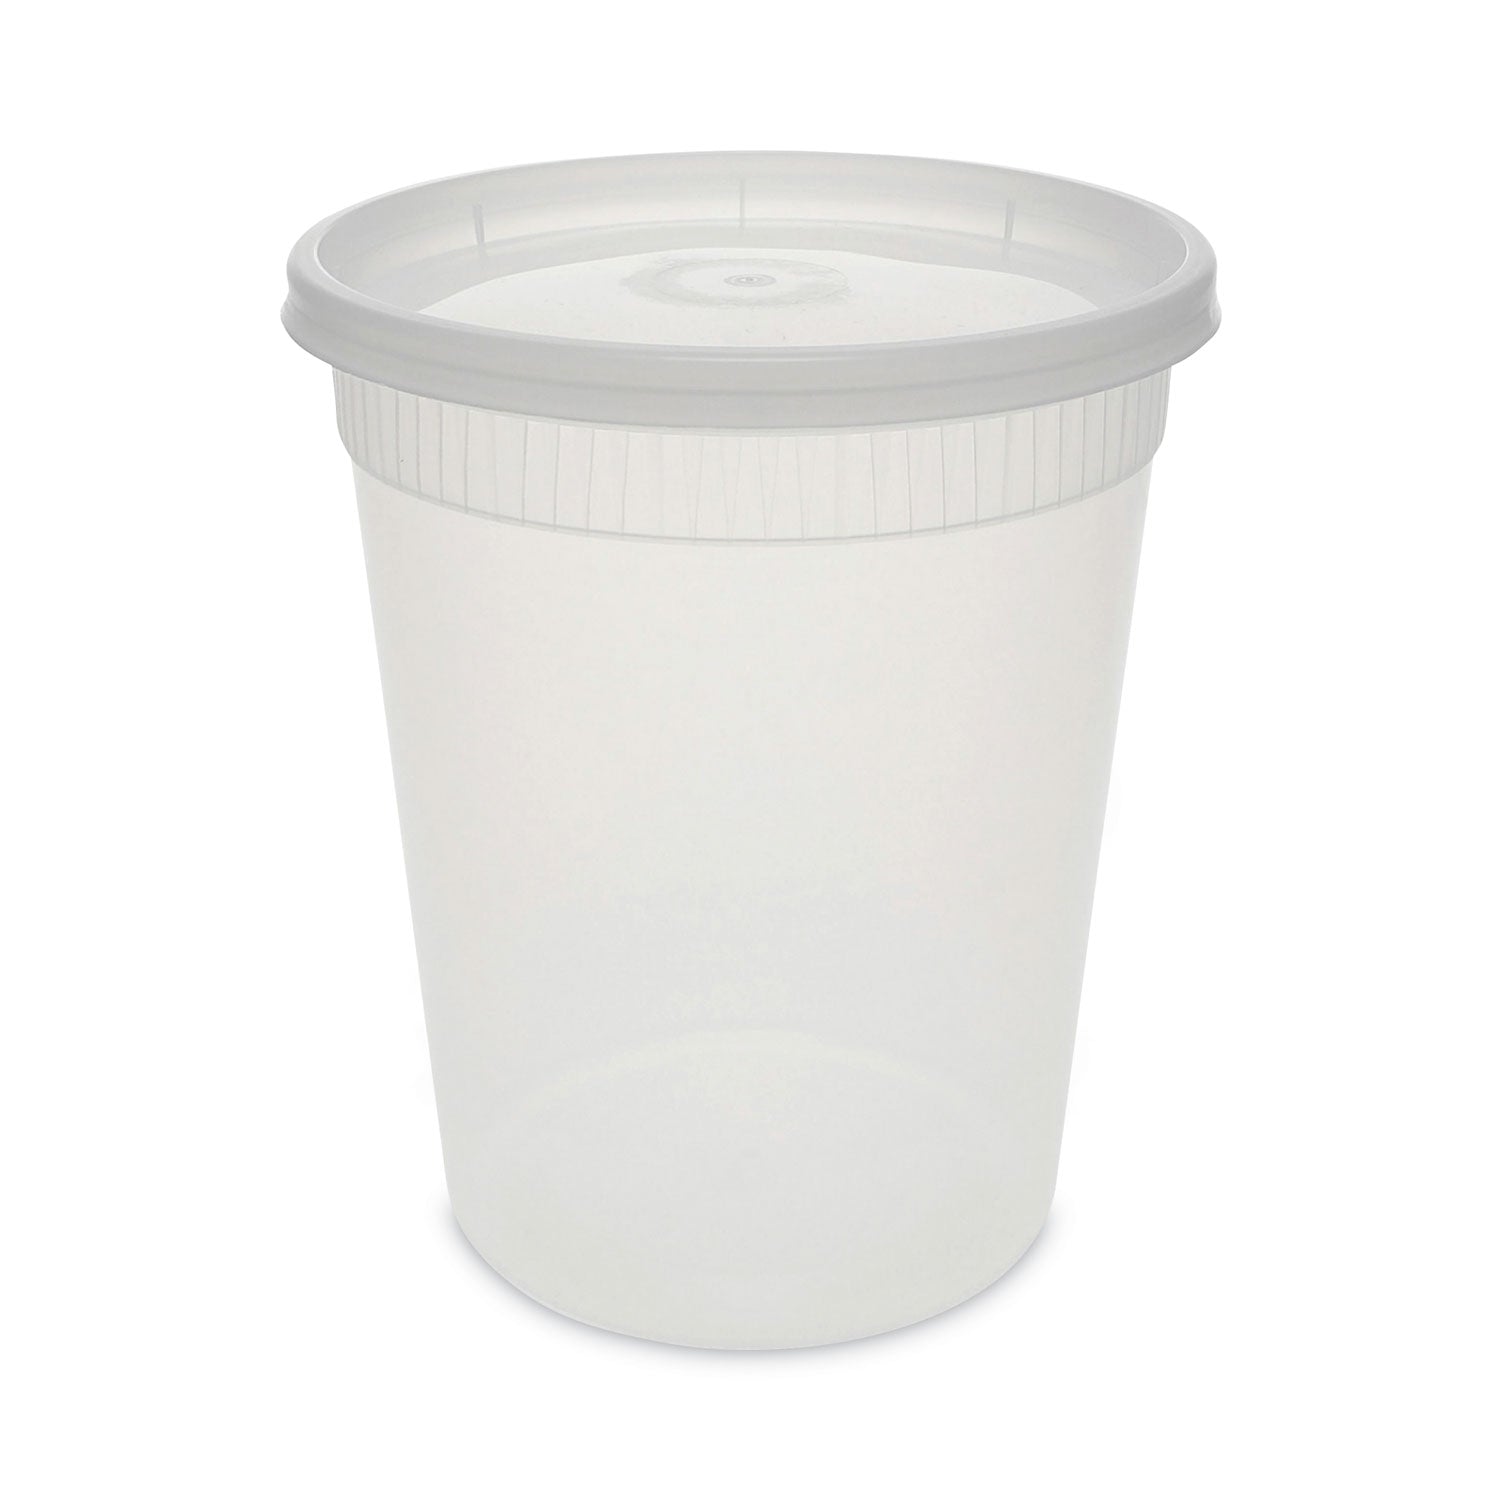 Newspring DELItainer Microwavable Container, 32 oz, 4 .55 Diameter x 5.55 h, Clear, Plastic, 240/Carton - 